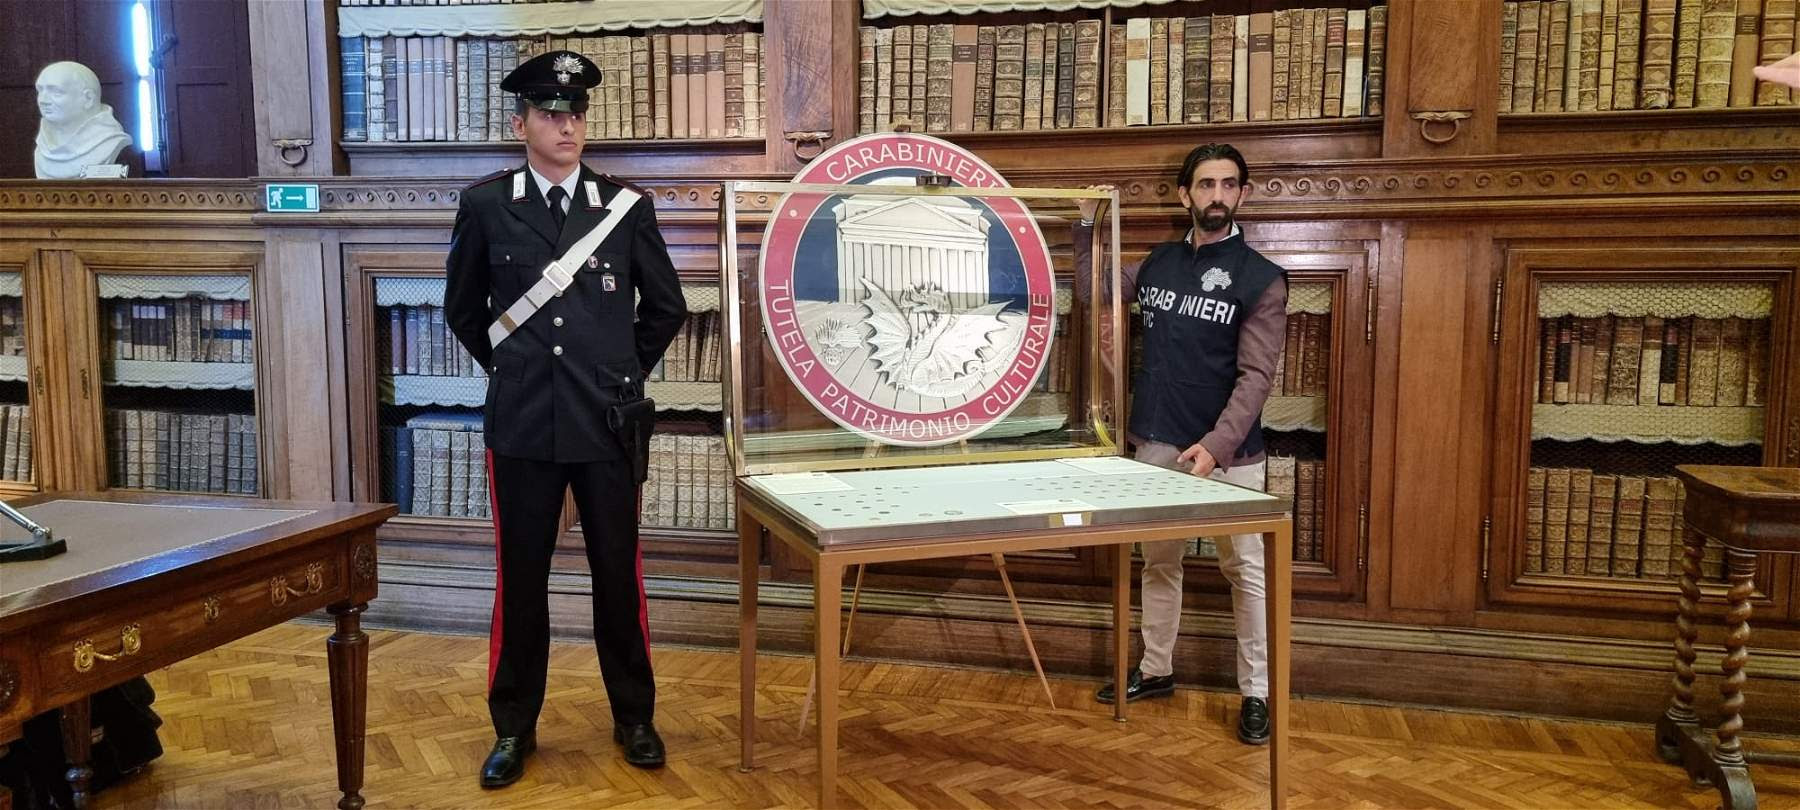 Parma, 56 ancient coins returned to the Pilotta. They had been stolen between 2006 and 2009